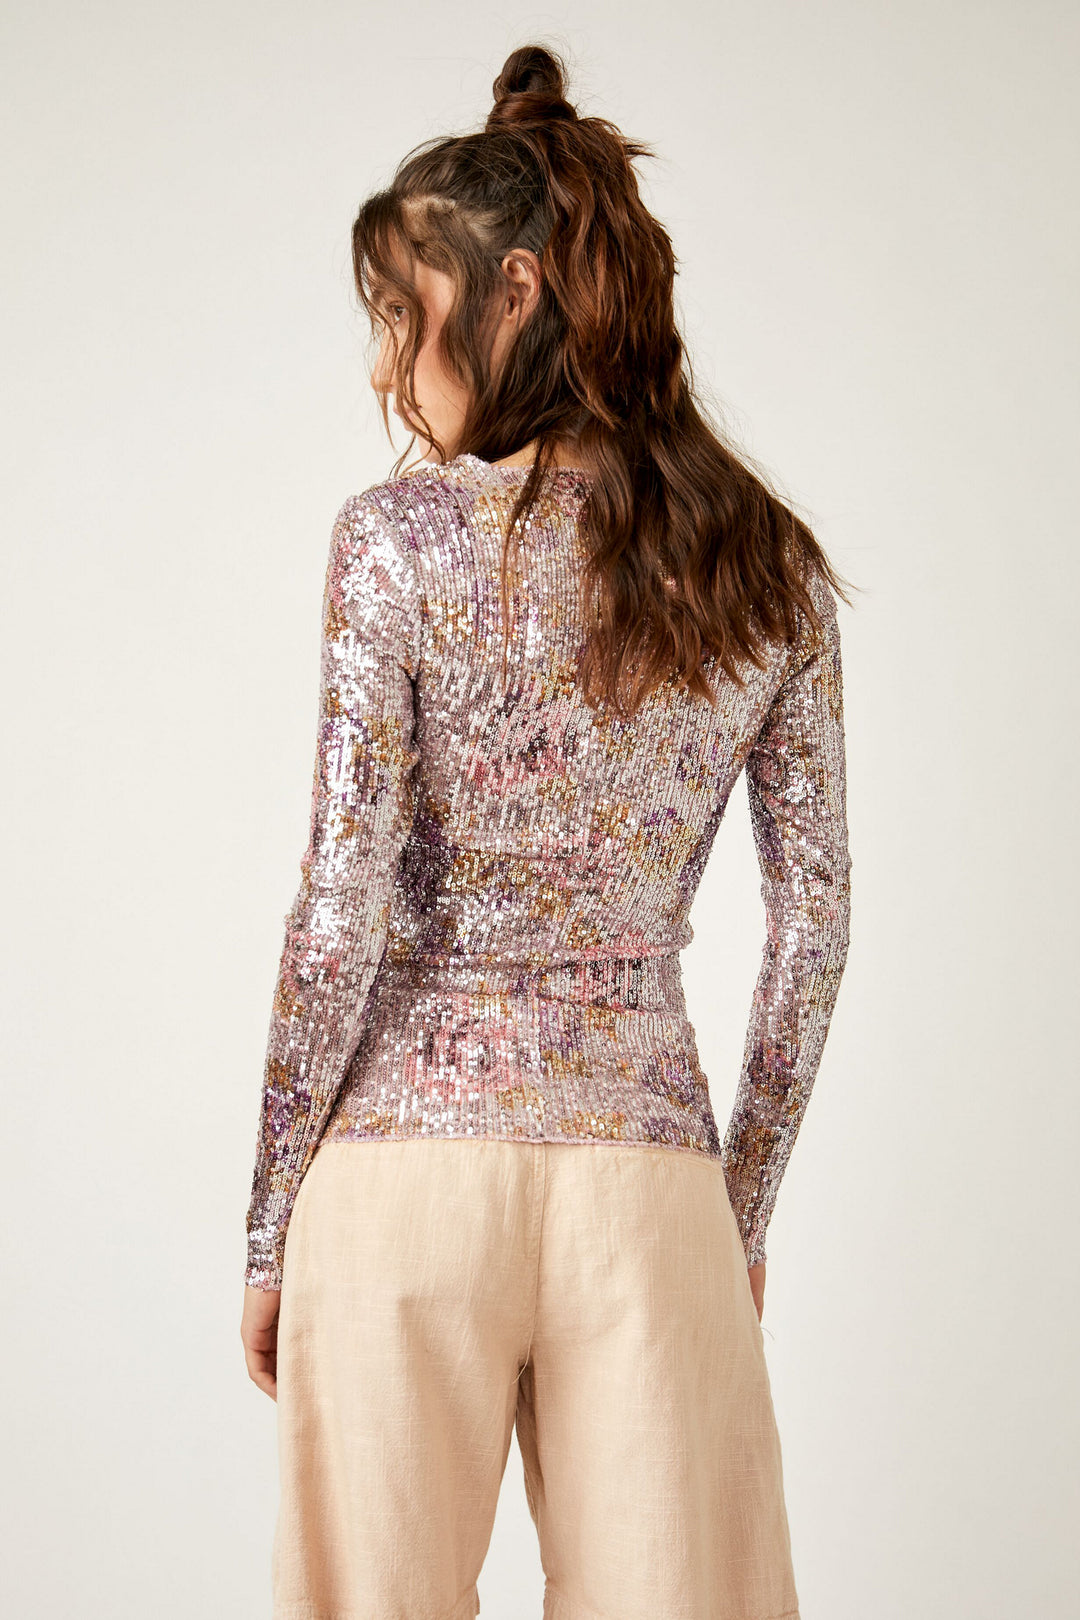 Look runway ready in the FREE PEOPLE PRINTED GOLD RUSH SEQUIN TOP - MIDNIGHT. This figure-hugging piece of glamour features long sleeves, a high neckline, and sparkly sequins for a night out you'll never forget! Get ready to make a statement and sparkle with each turn.